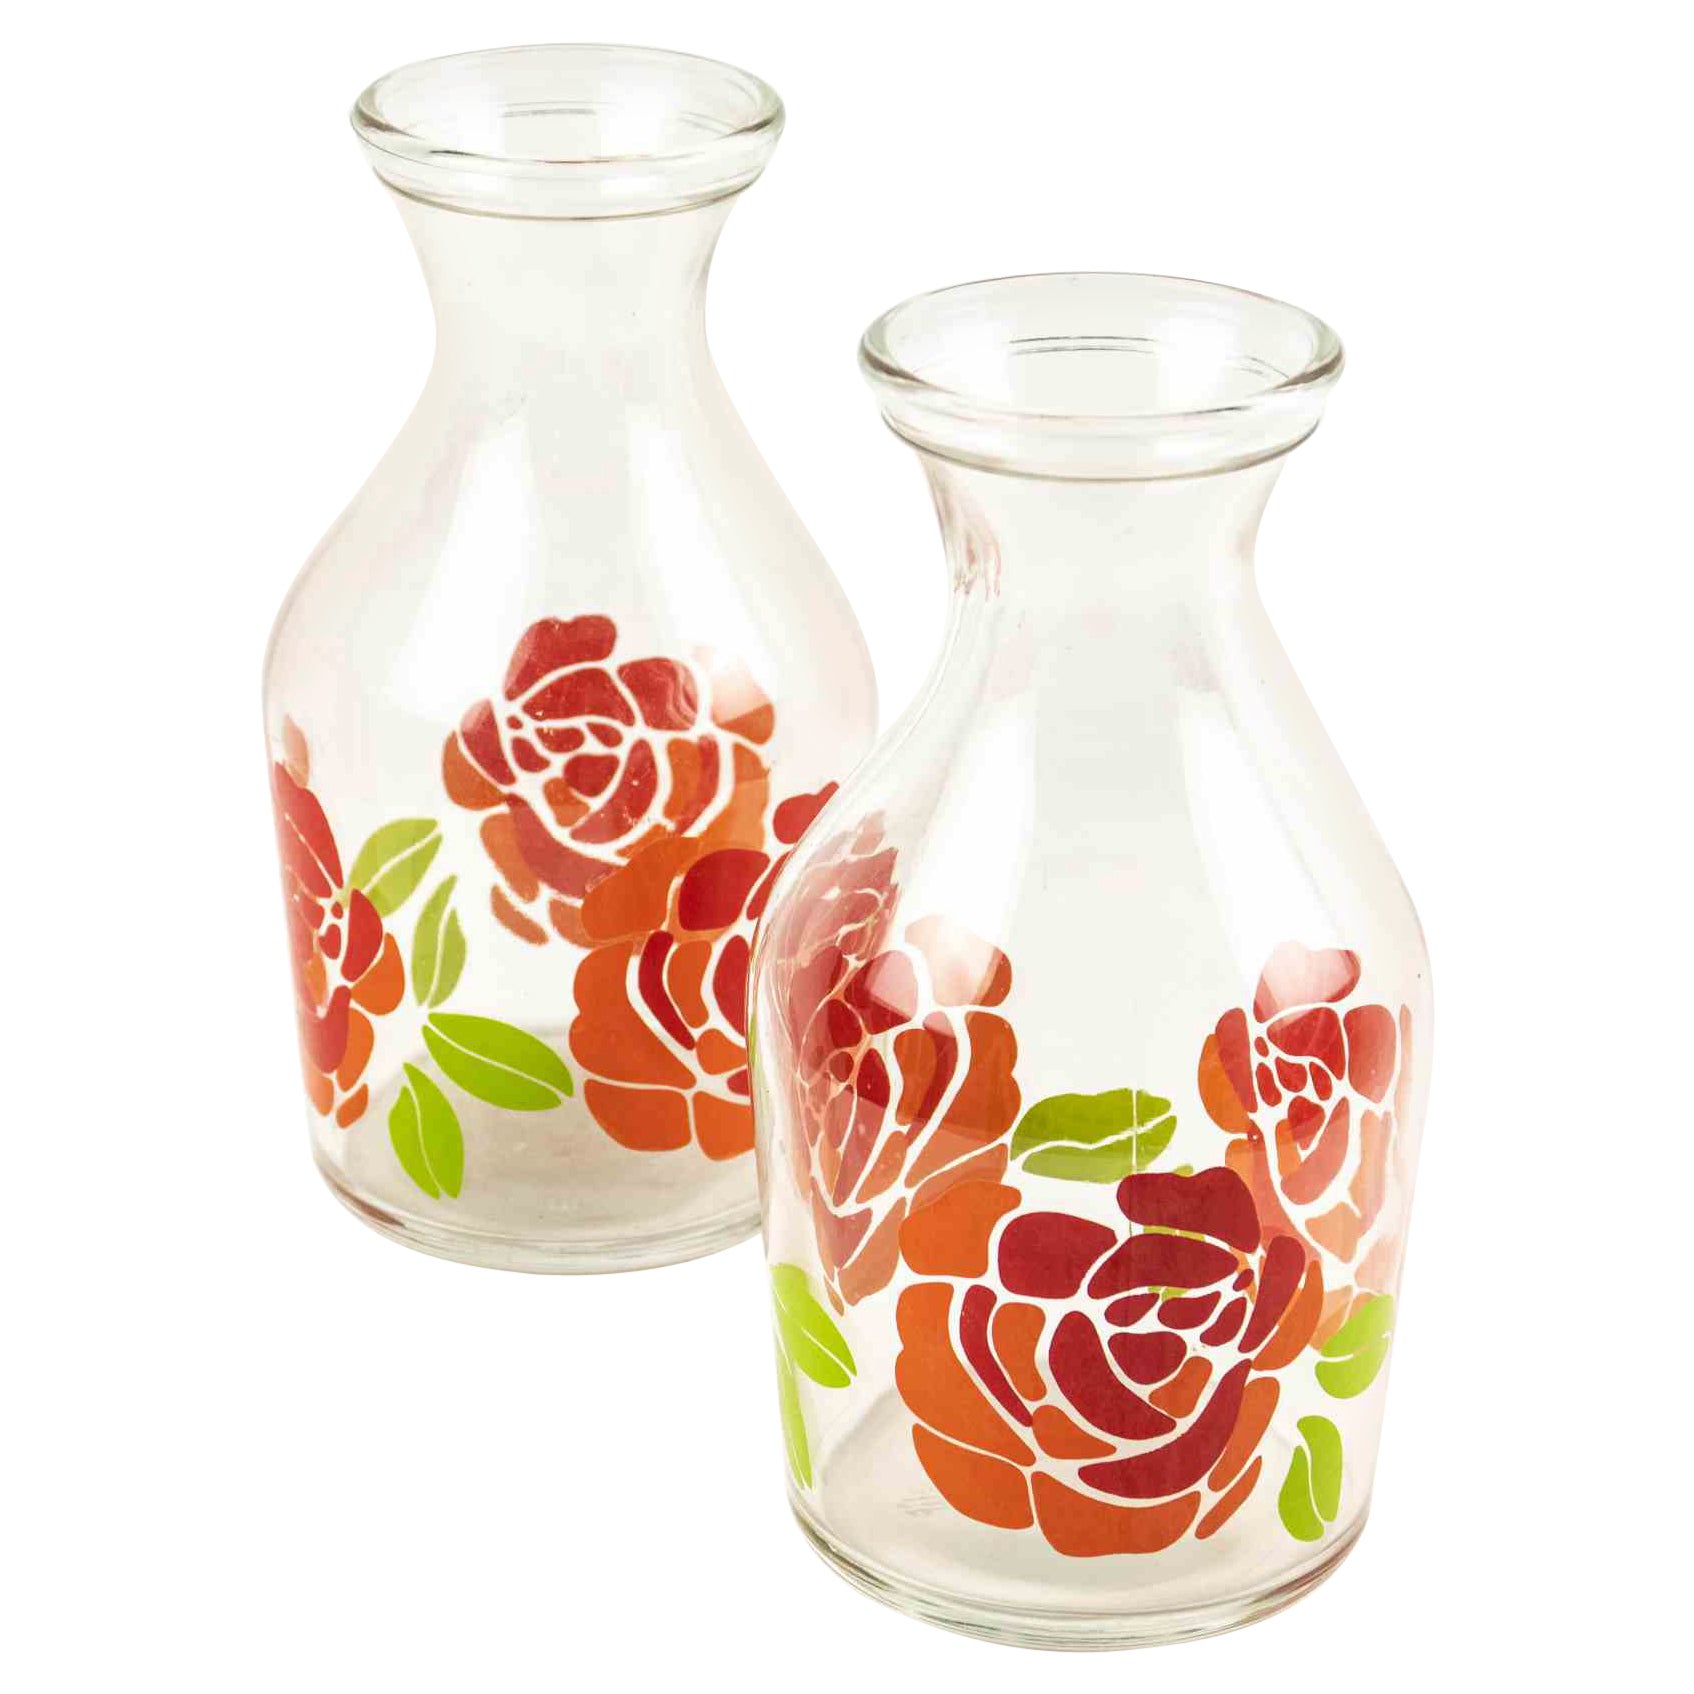 Pair of Glass Vases, Italy, 1970s